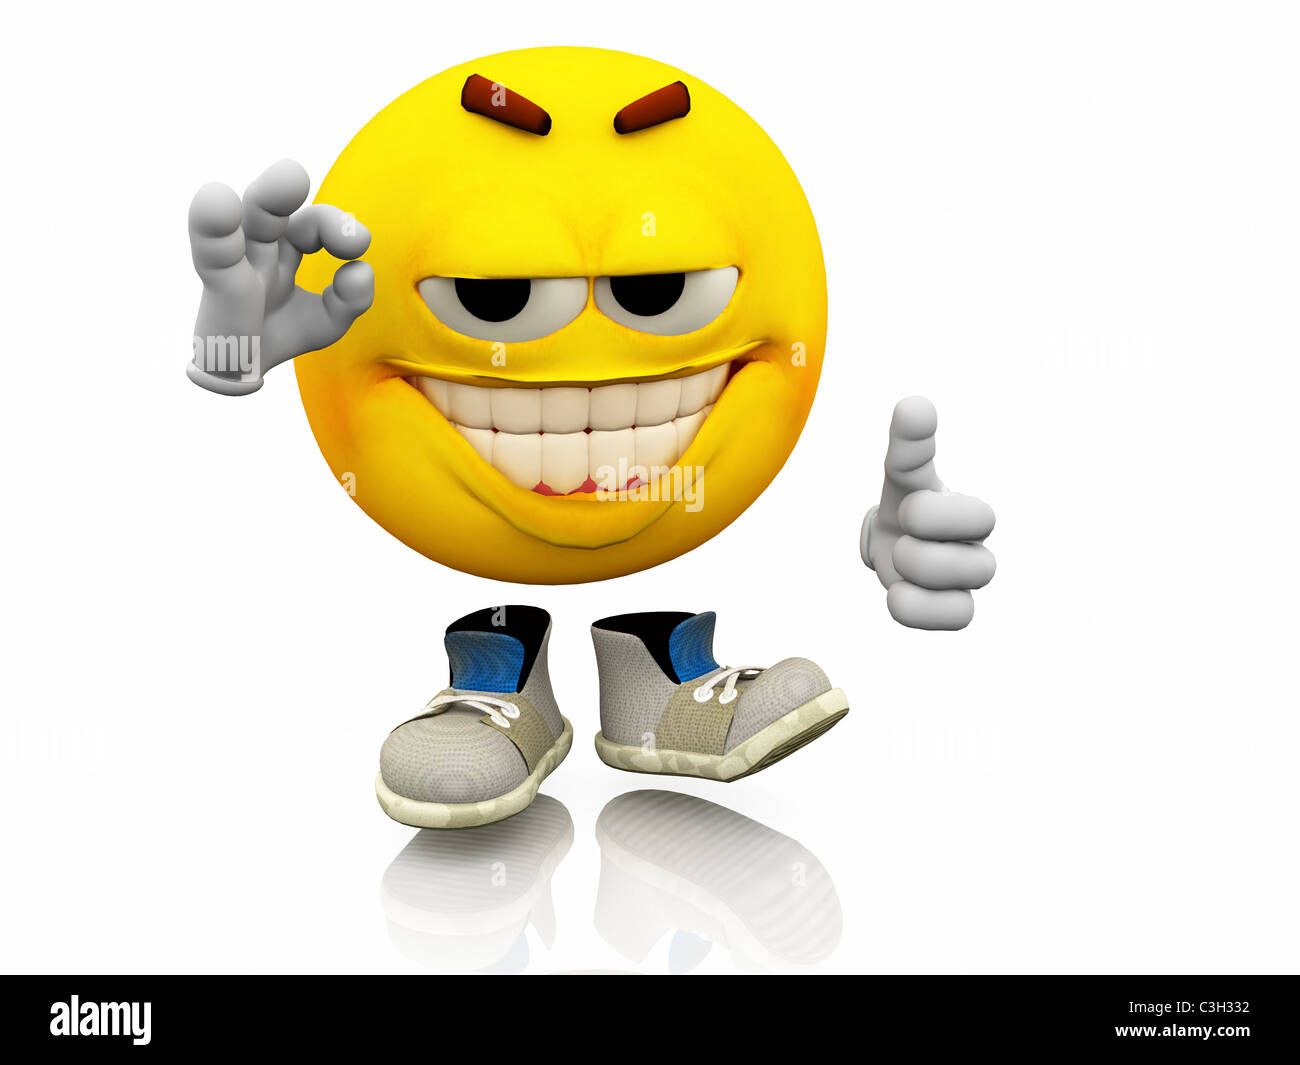 smiley-emoticon-facial-expression-hot-emotional-expression-on-a-yellow-C3H332.jpg